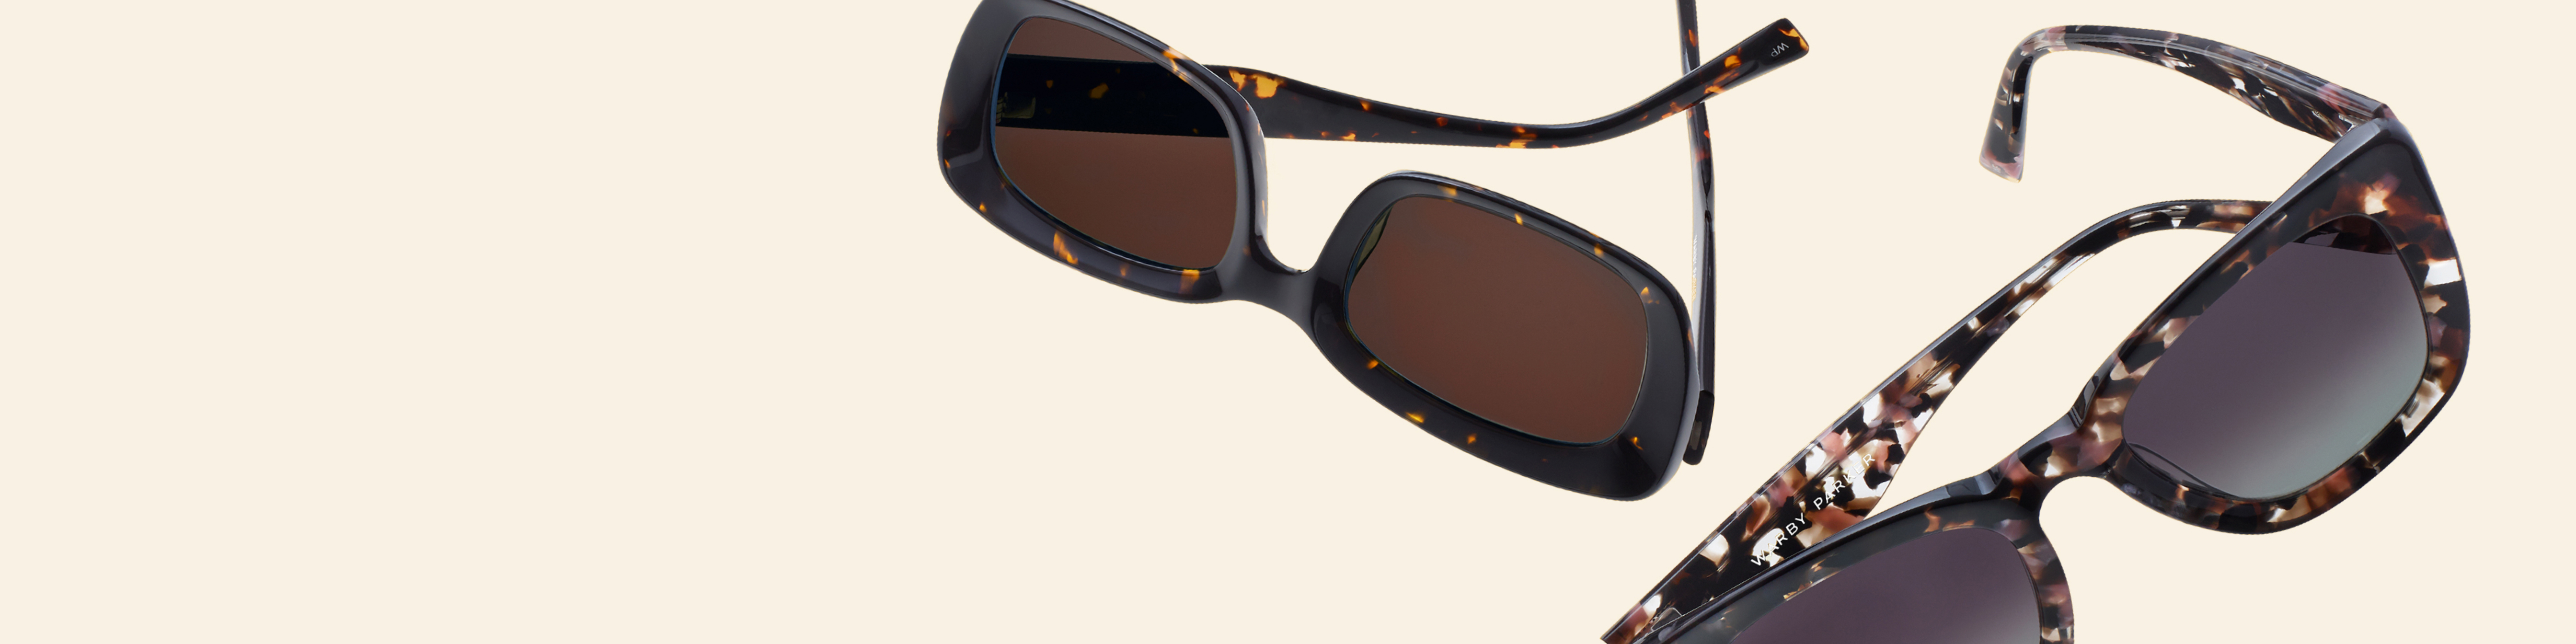 Two sunglasses in acetate frames